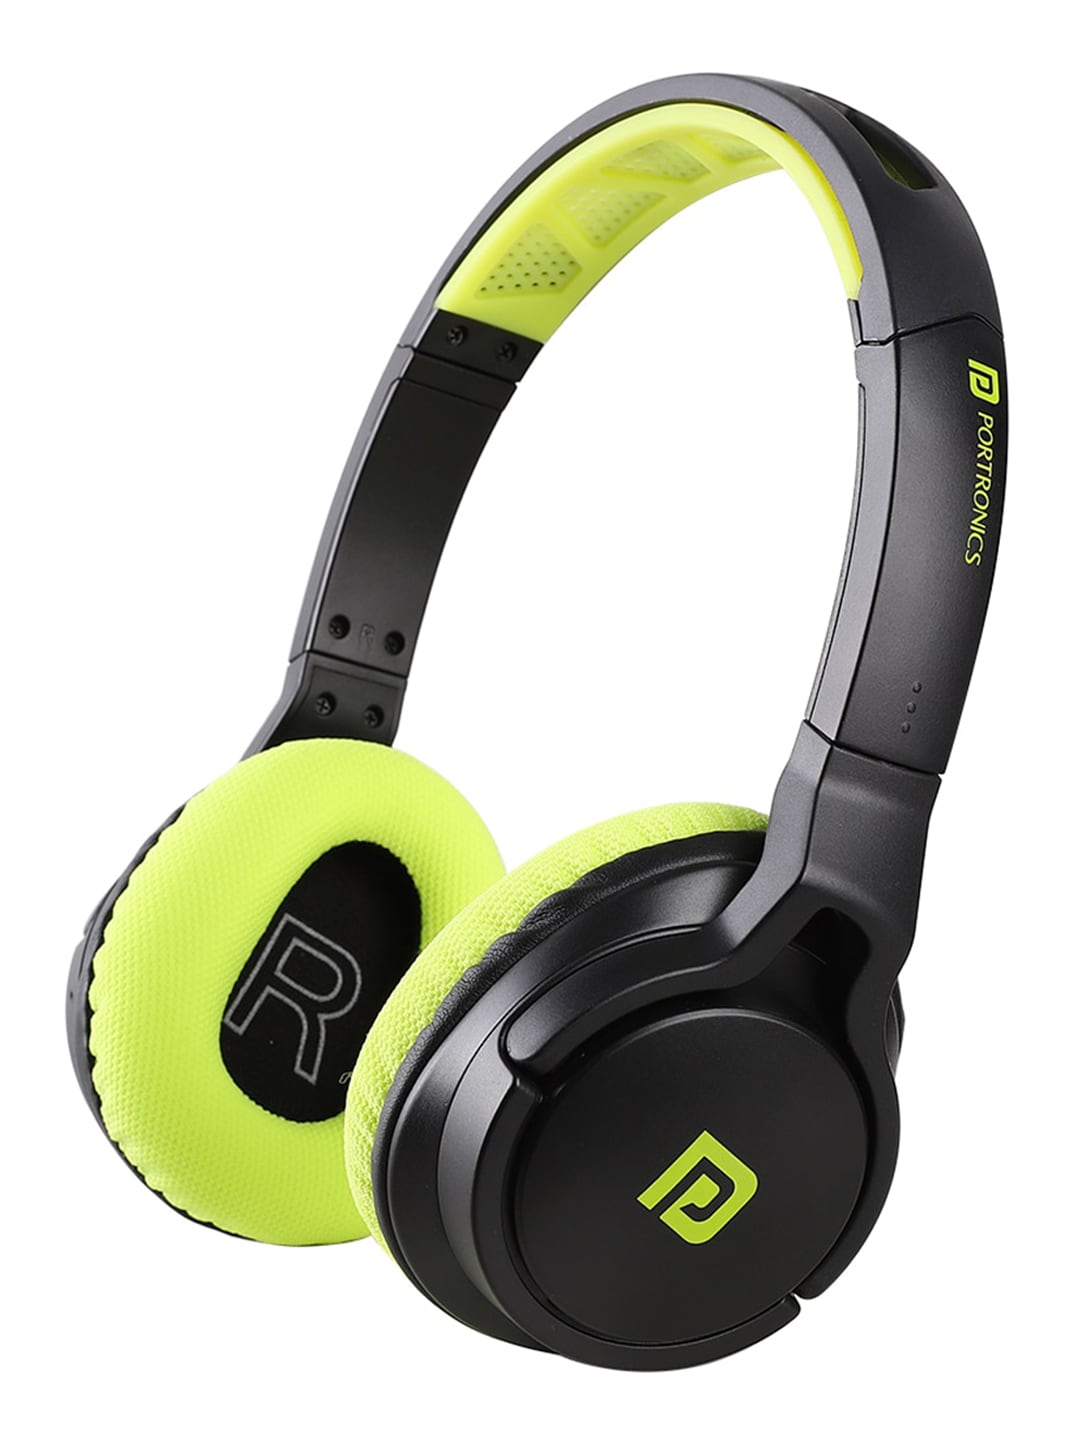 Portronics Green & Black Solid Muffs M1 Wireless Bluetooth Over Ear Headphone Price in India